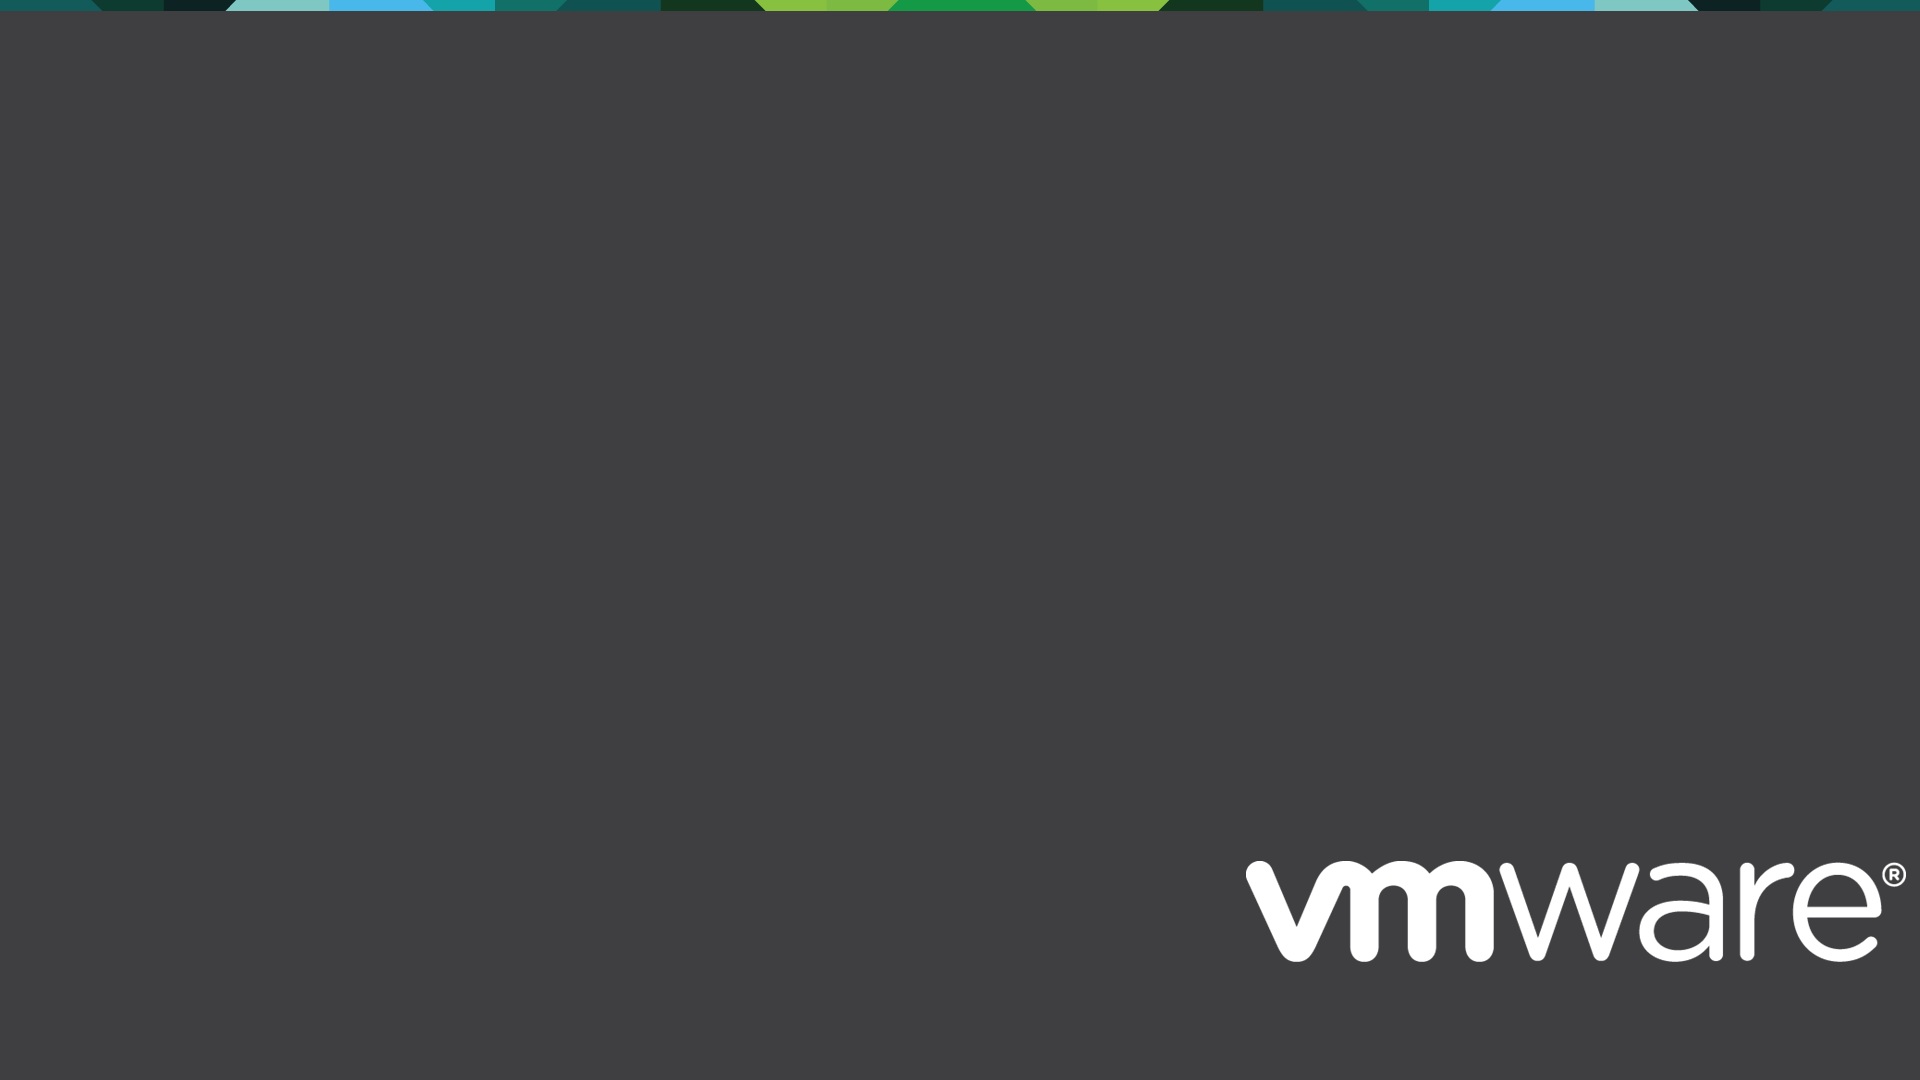 Vmware Wallpaper With Resolution